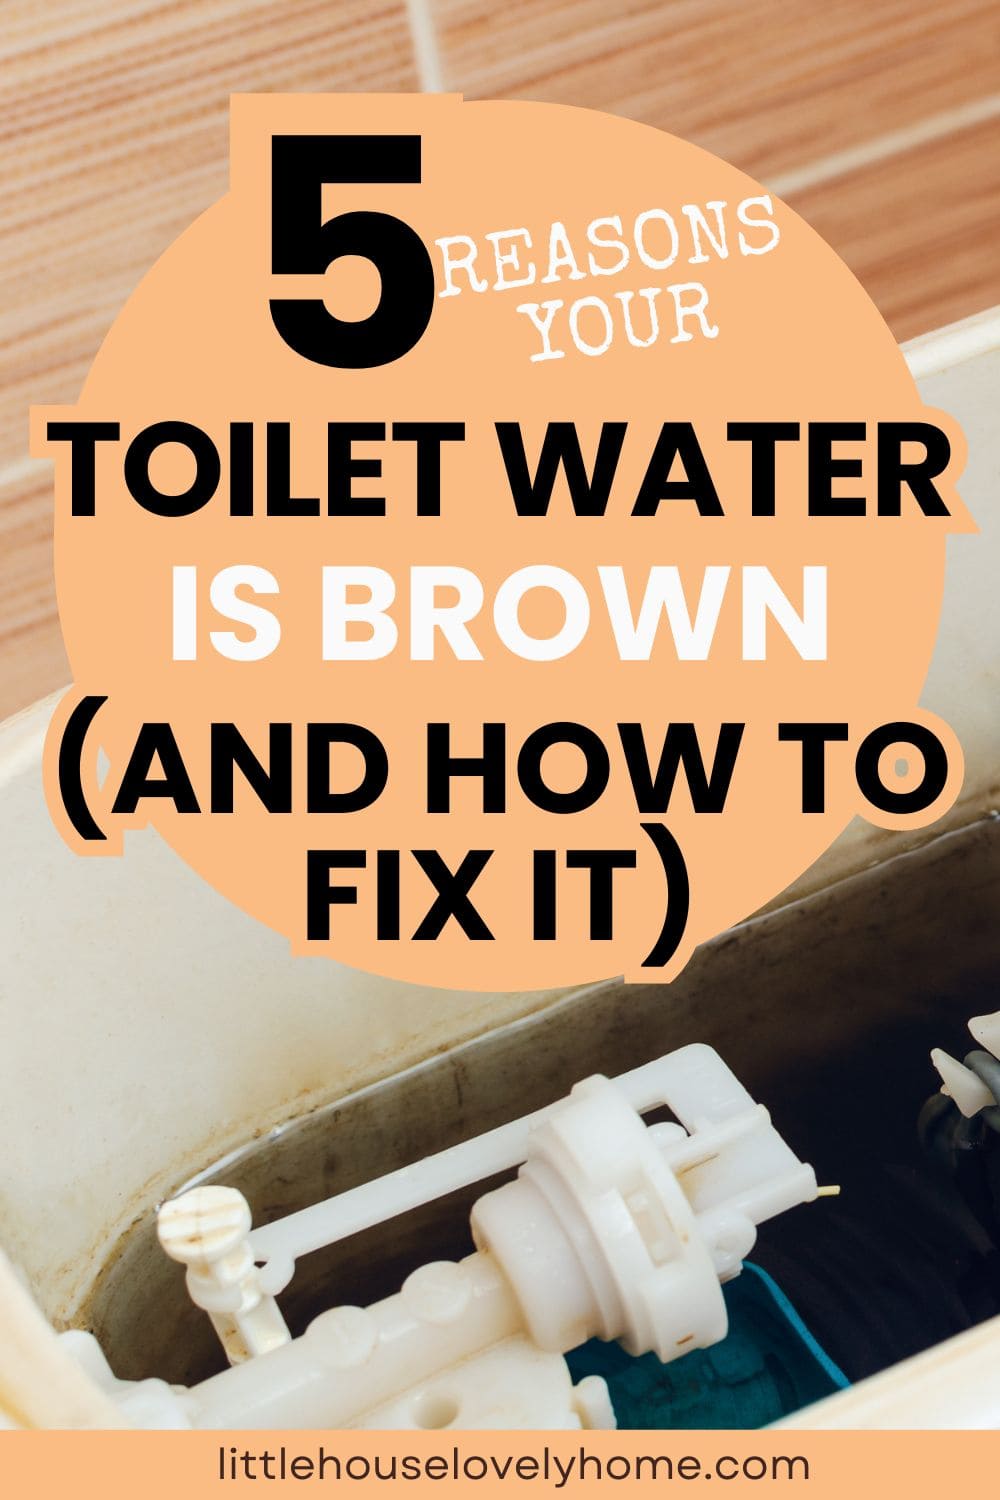 Reasons Your Toilet Water Is Brown